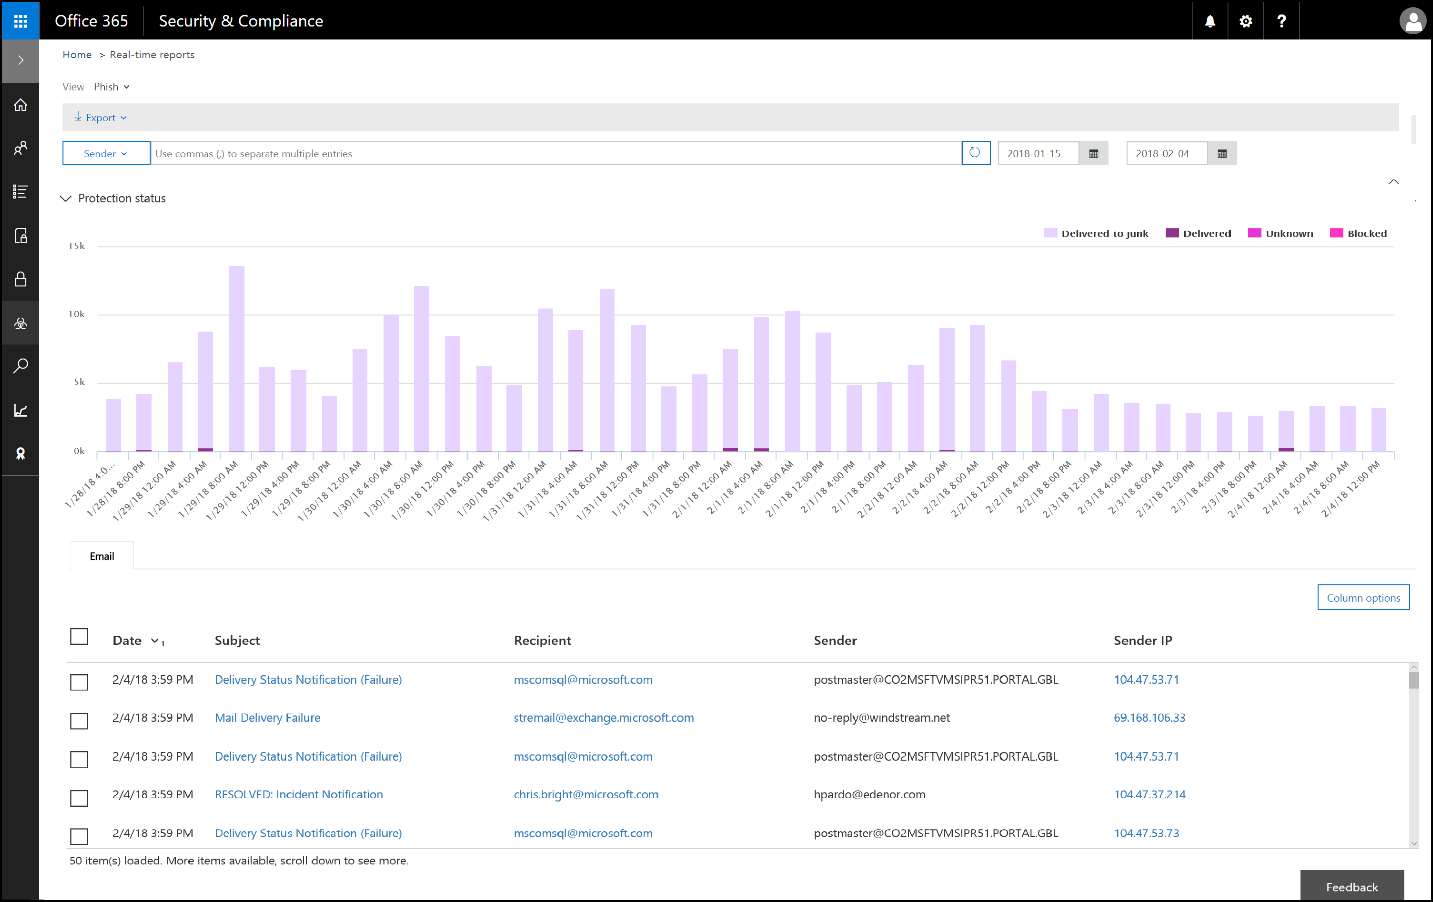 A screenshot displays the Office 365 Security & Compliance dashboard.